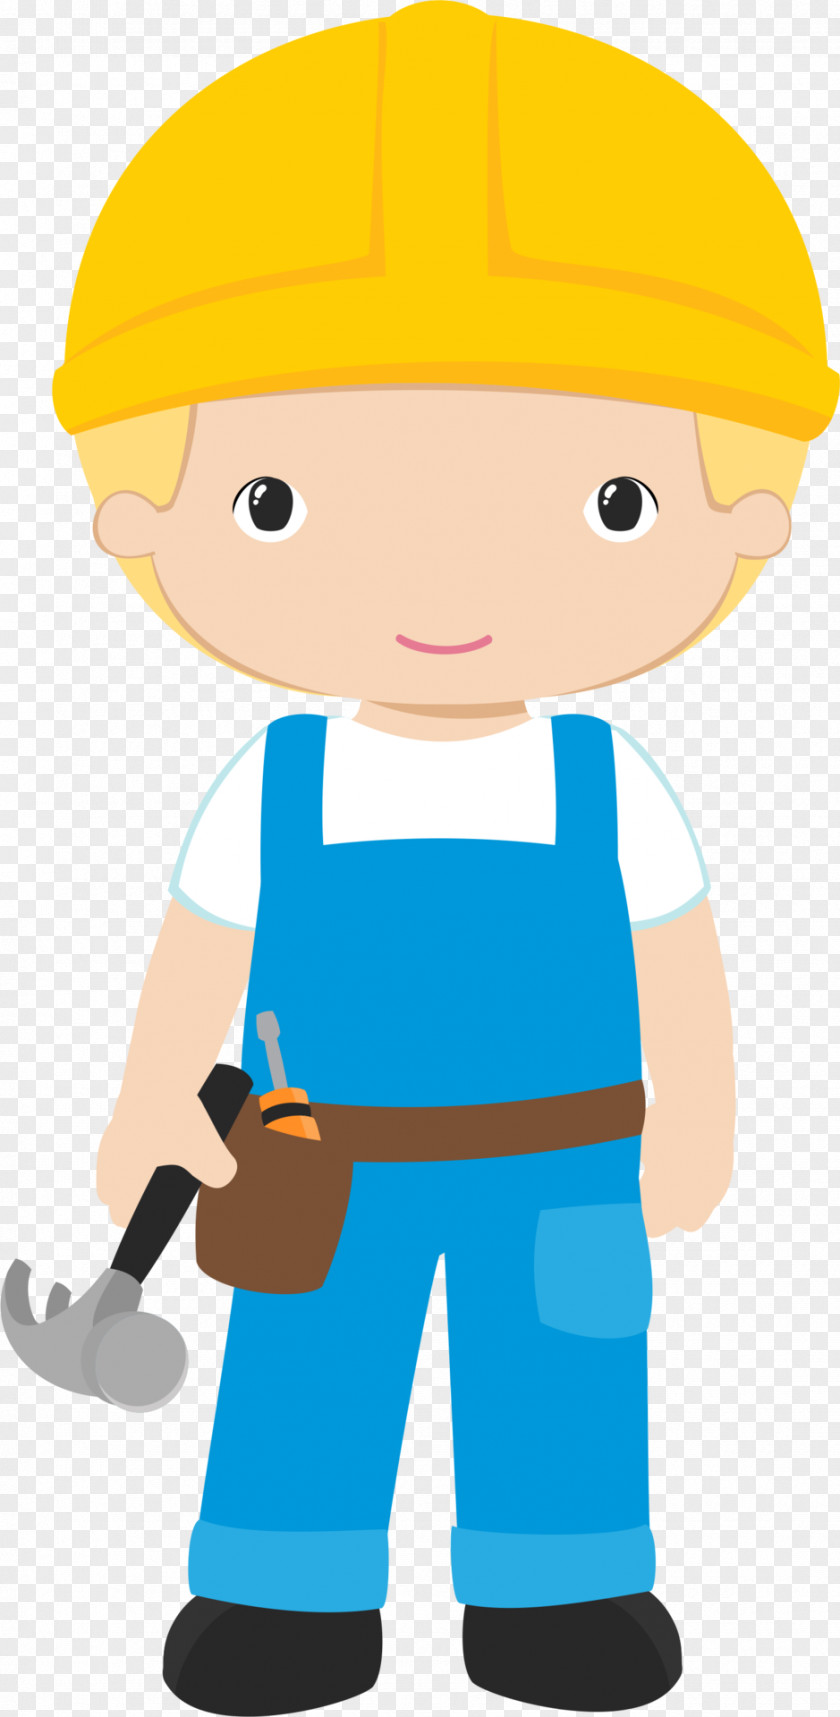 Profissoes Construction Worker Architectural Engineering Clip Art PNG